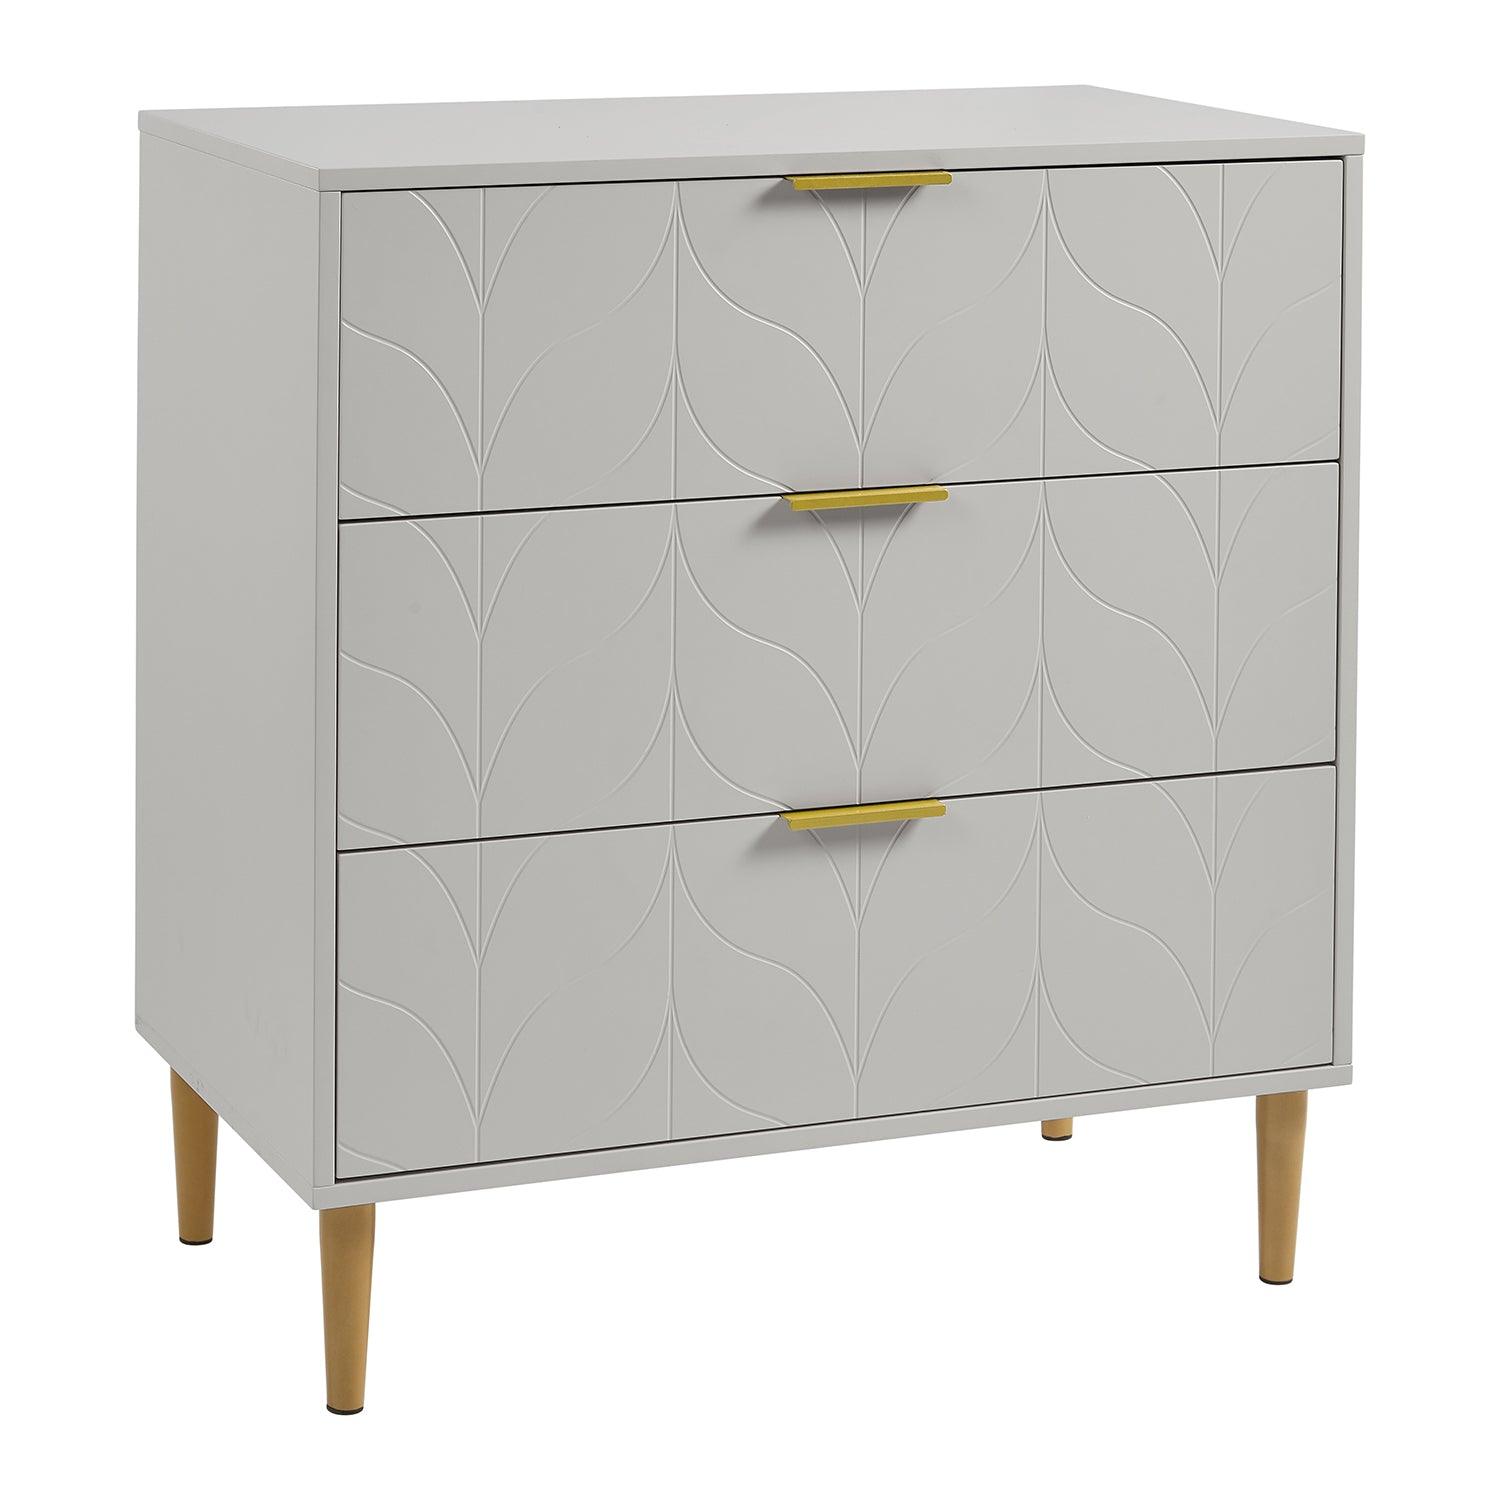 Gloria chest of drawers - grey & brass effect - Laura James